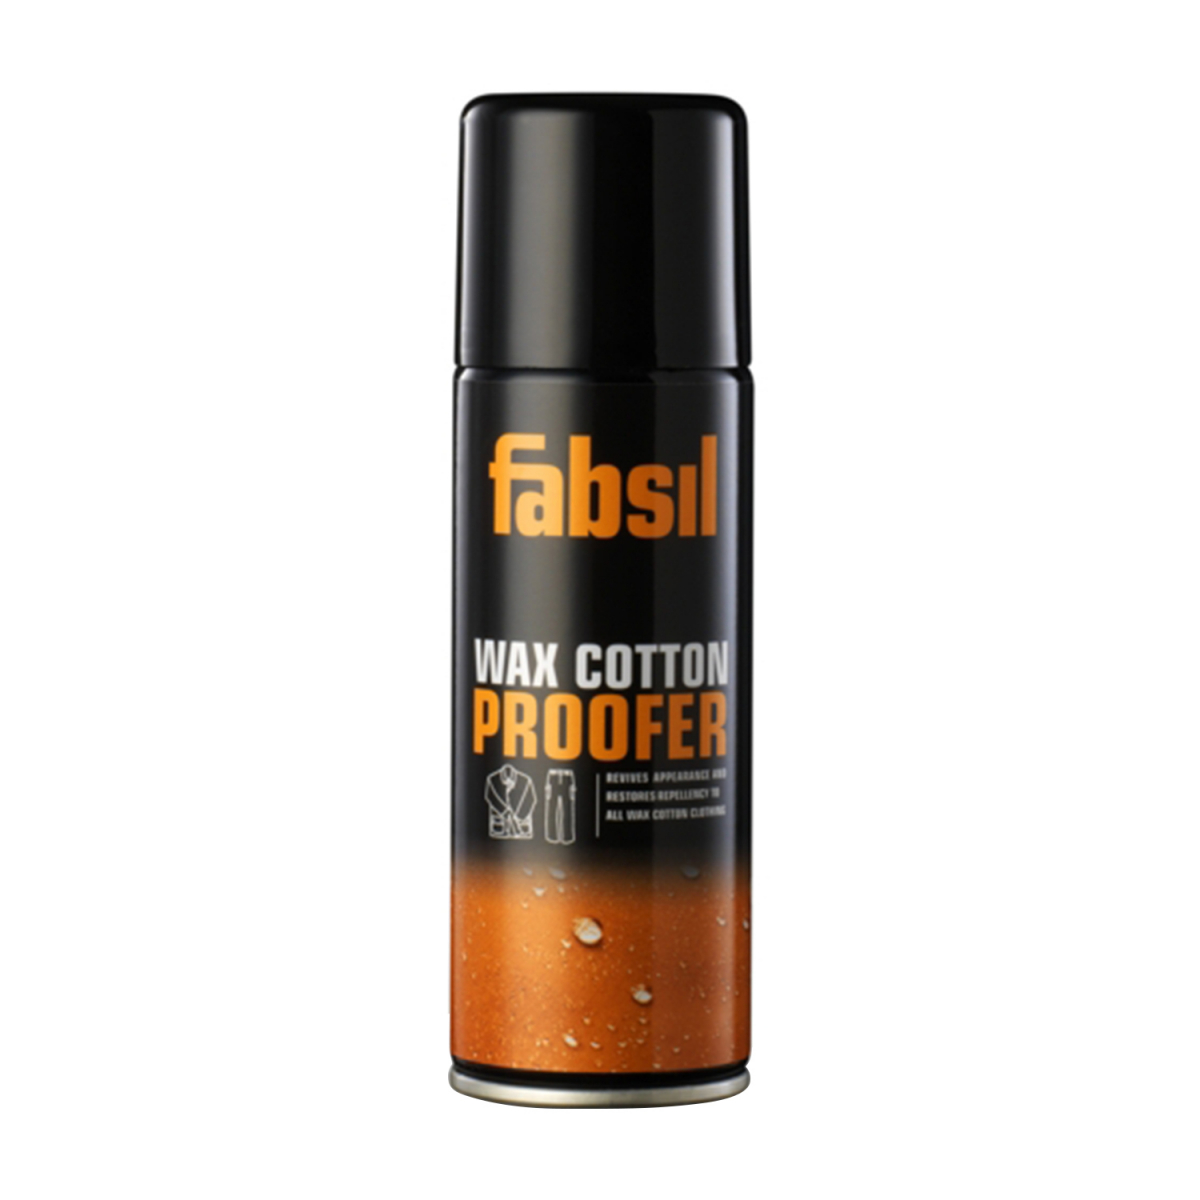 FABSIL - WAX COTTON PROOFER